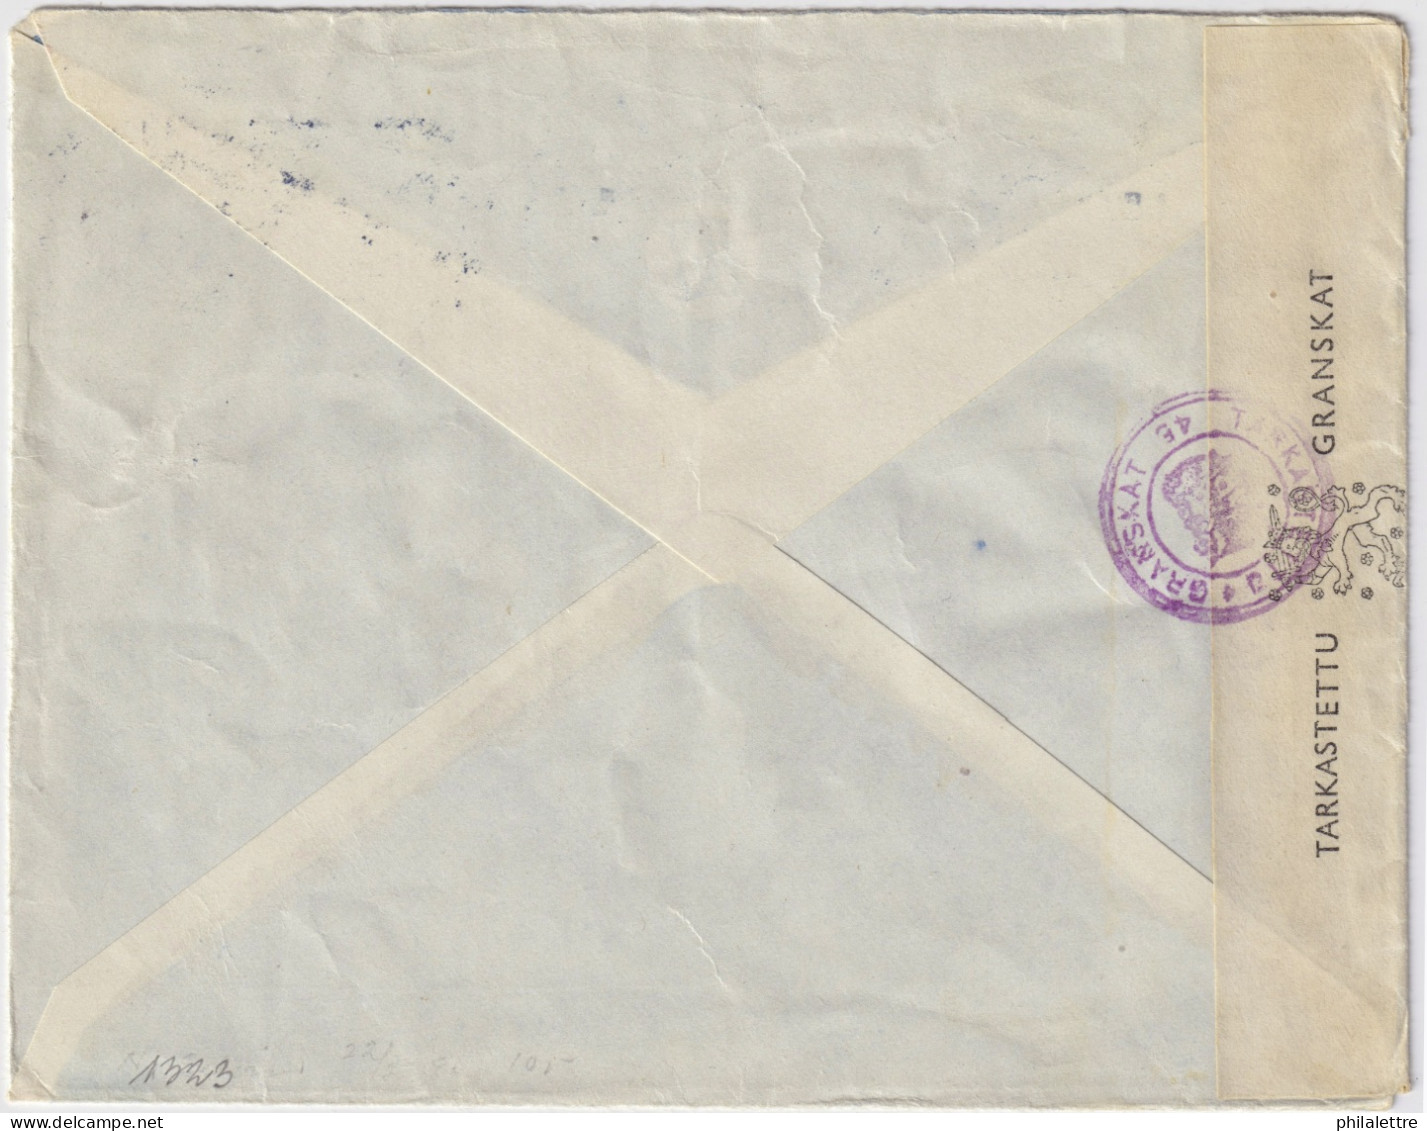 FINLAND - 1945 - Facit F258, F295 & F296 Red Cross (1942 & 45 Issues) On Censored Cover From HELSINKI To MOTALA, Sweden - Storia Postale